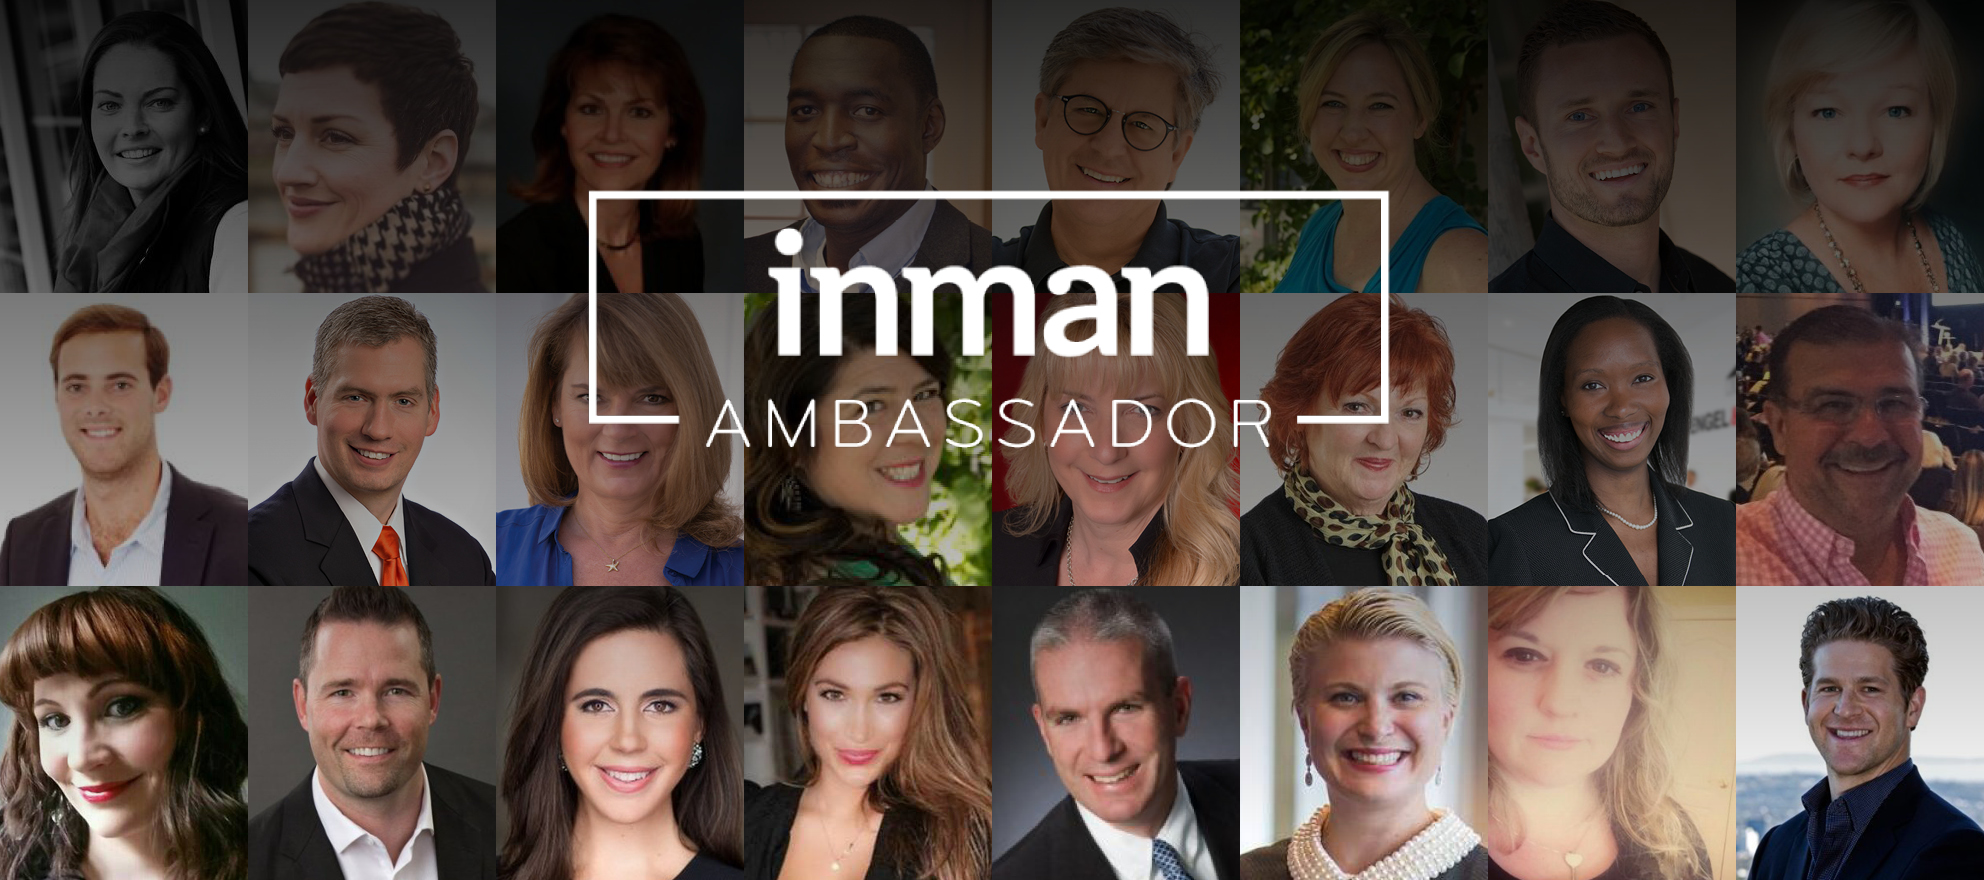 Inman announces 25 Ambassadors for Connect New York Inman